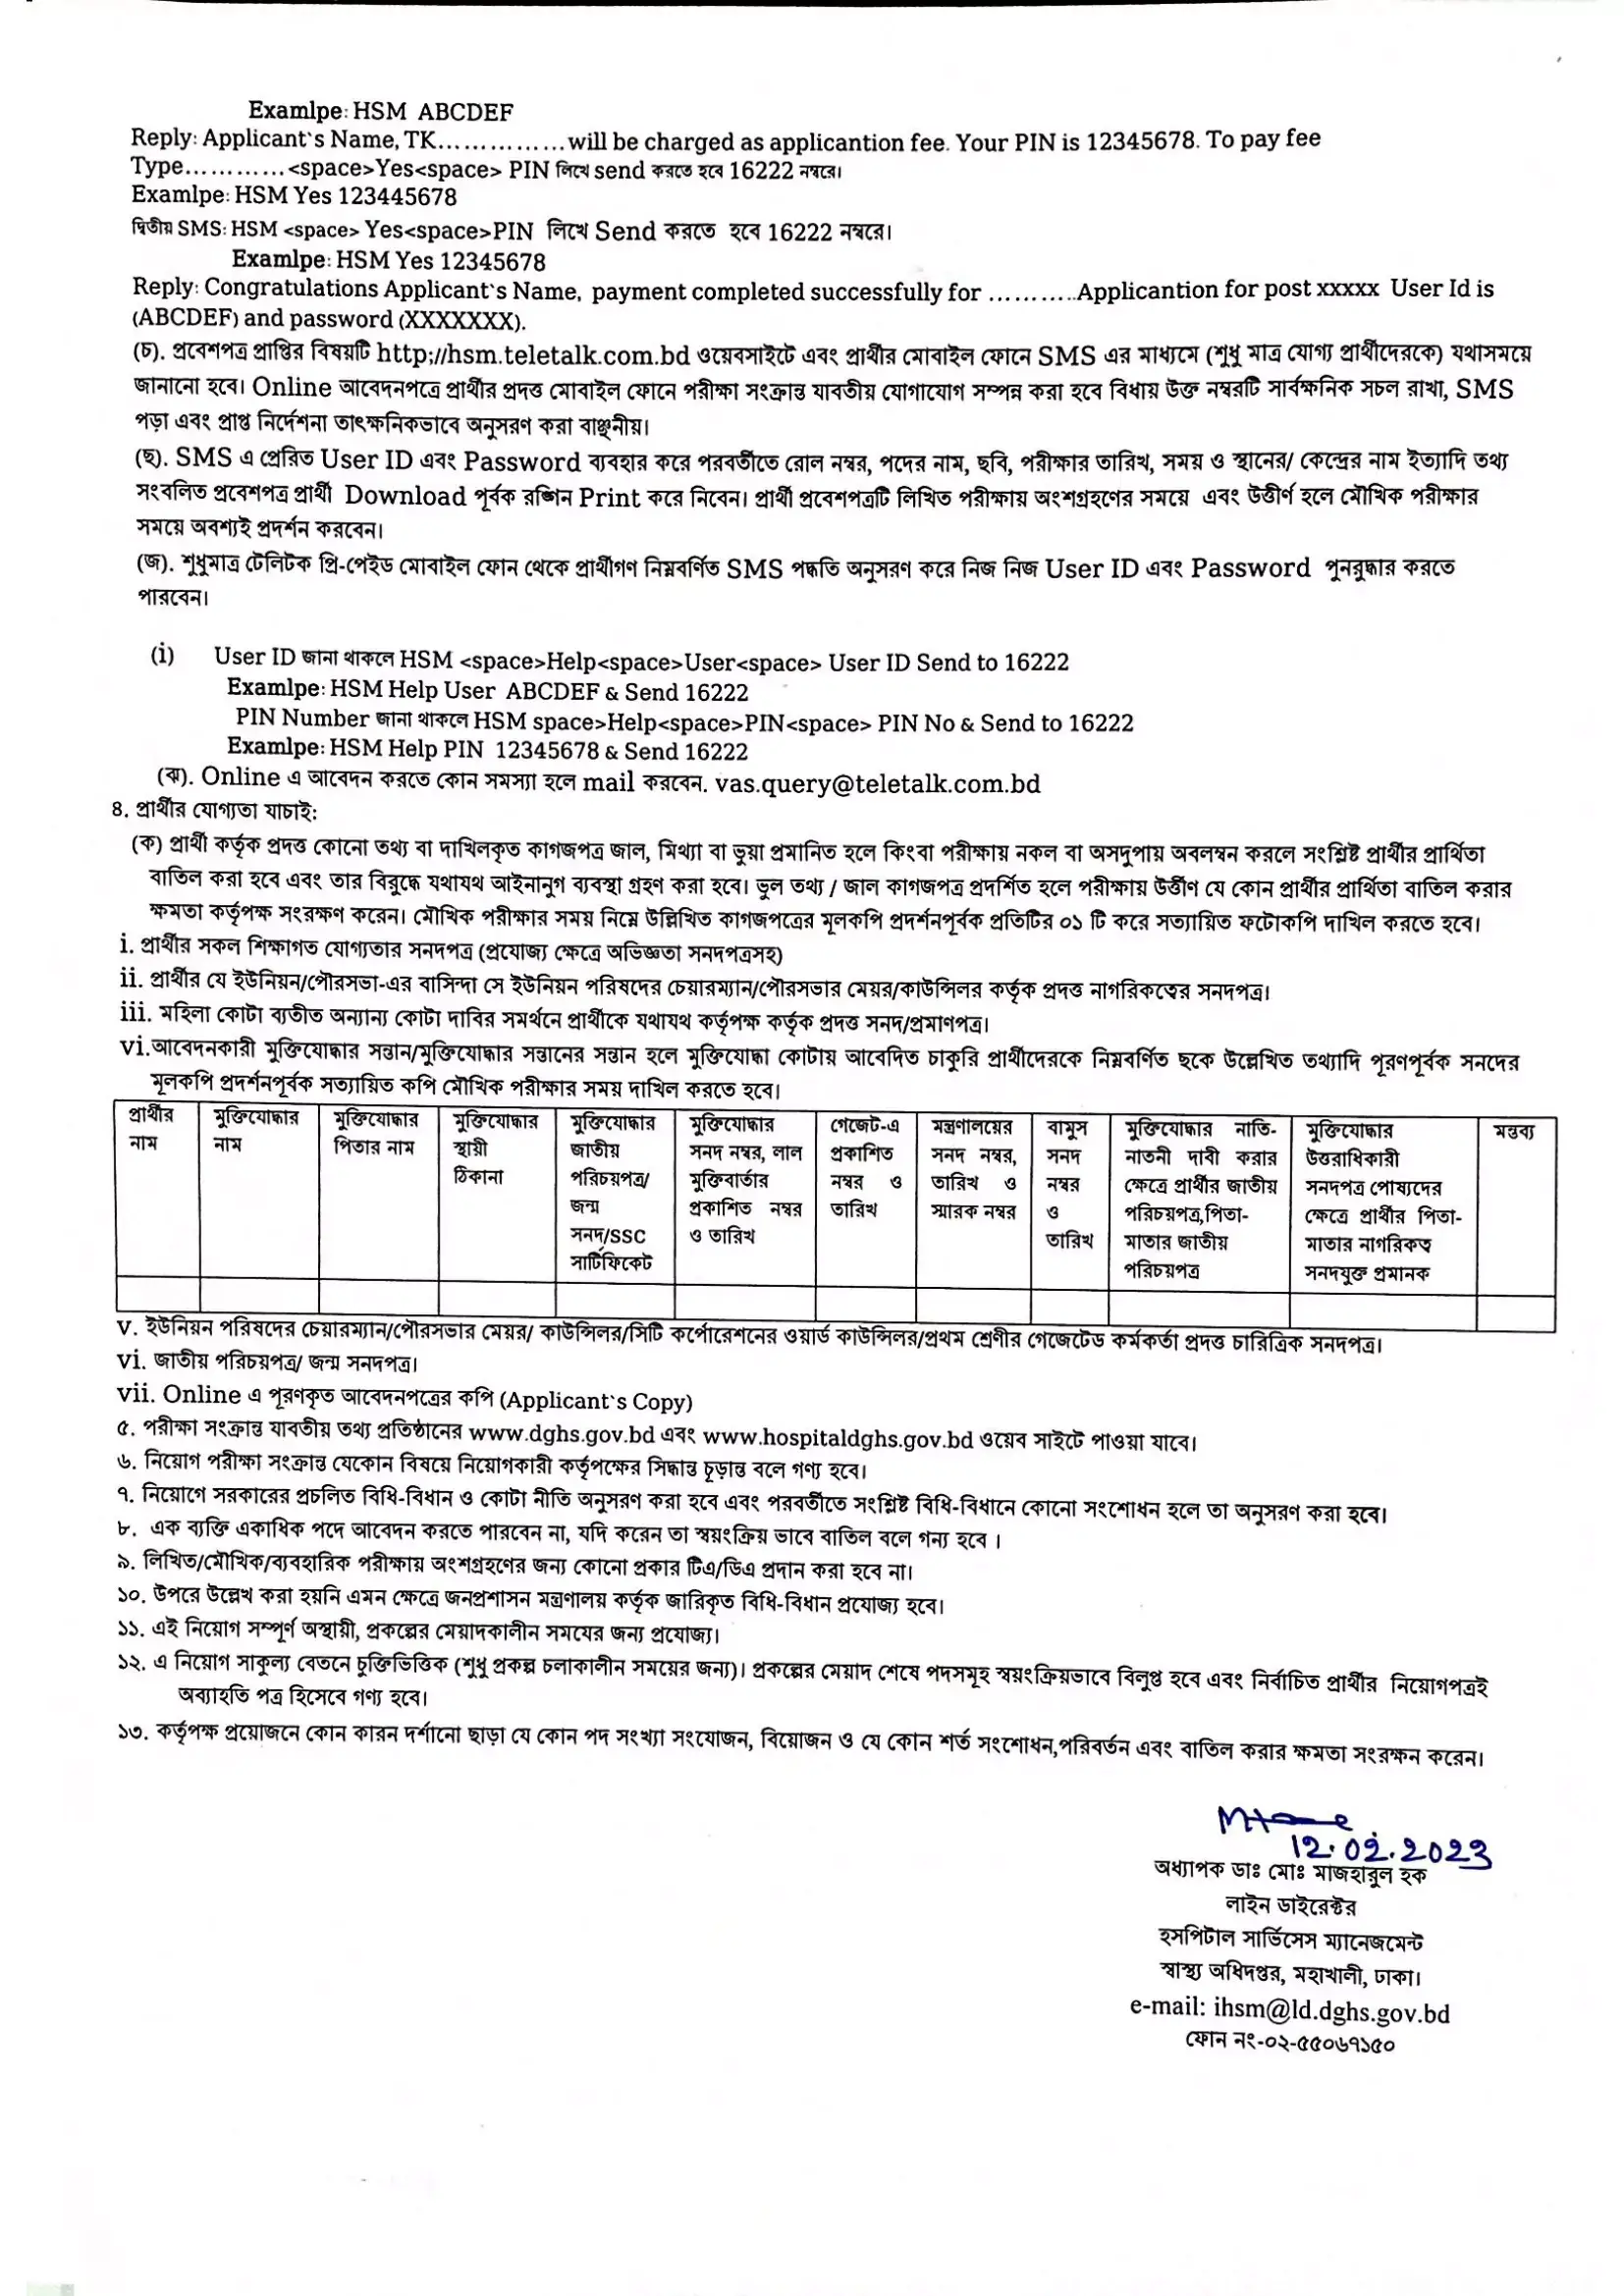 Fourth page of Directorate General of Health Services (DGHS) recruitment circular published on 12 February 2023